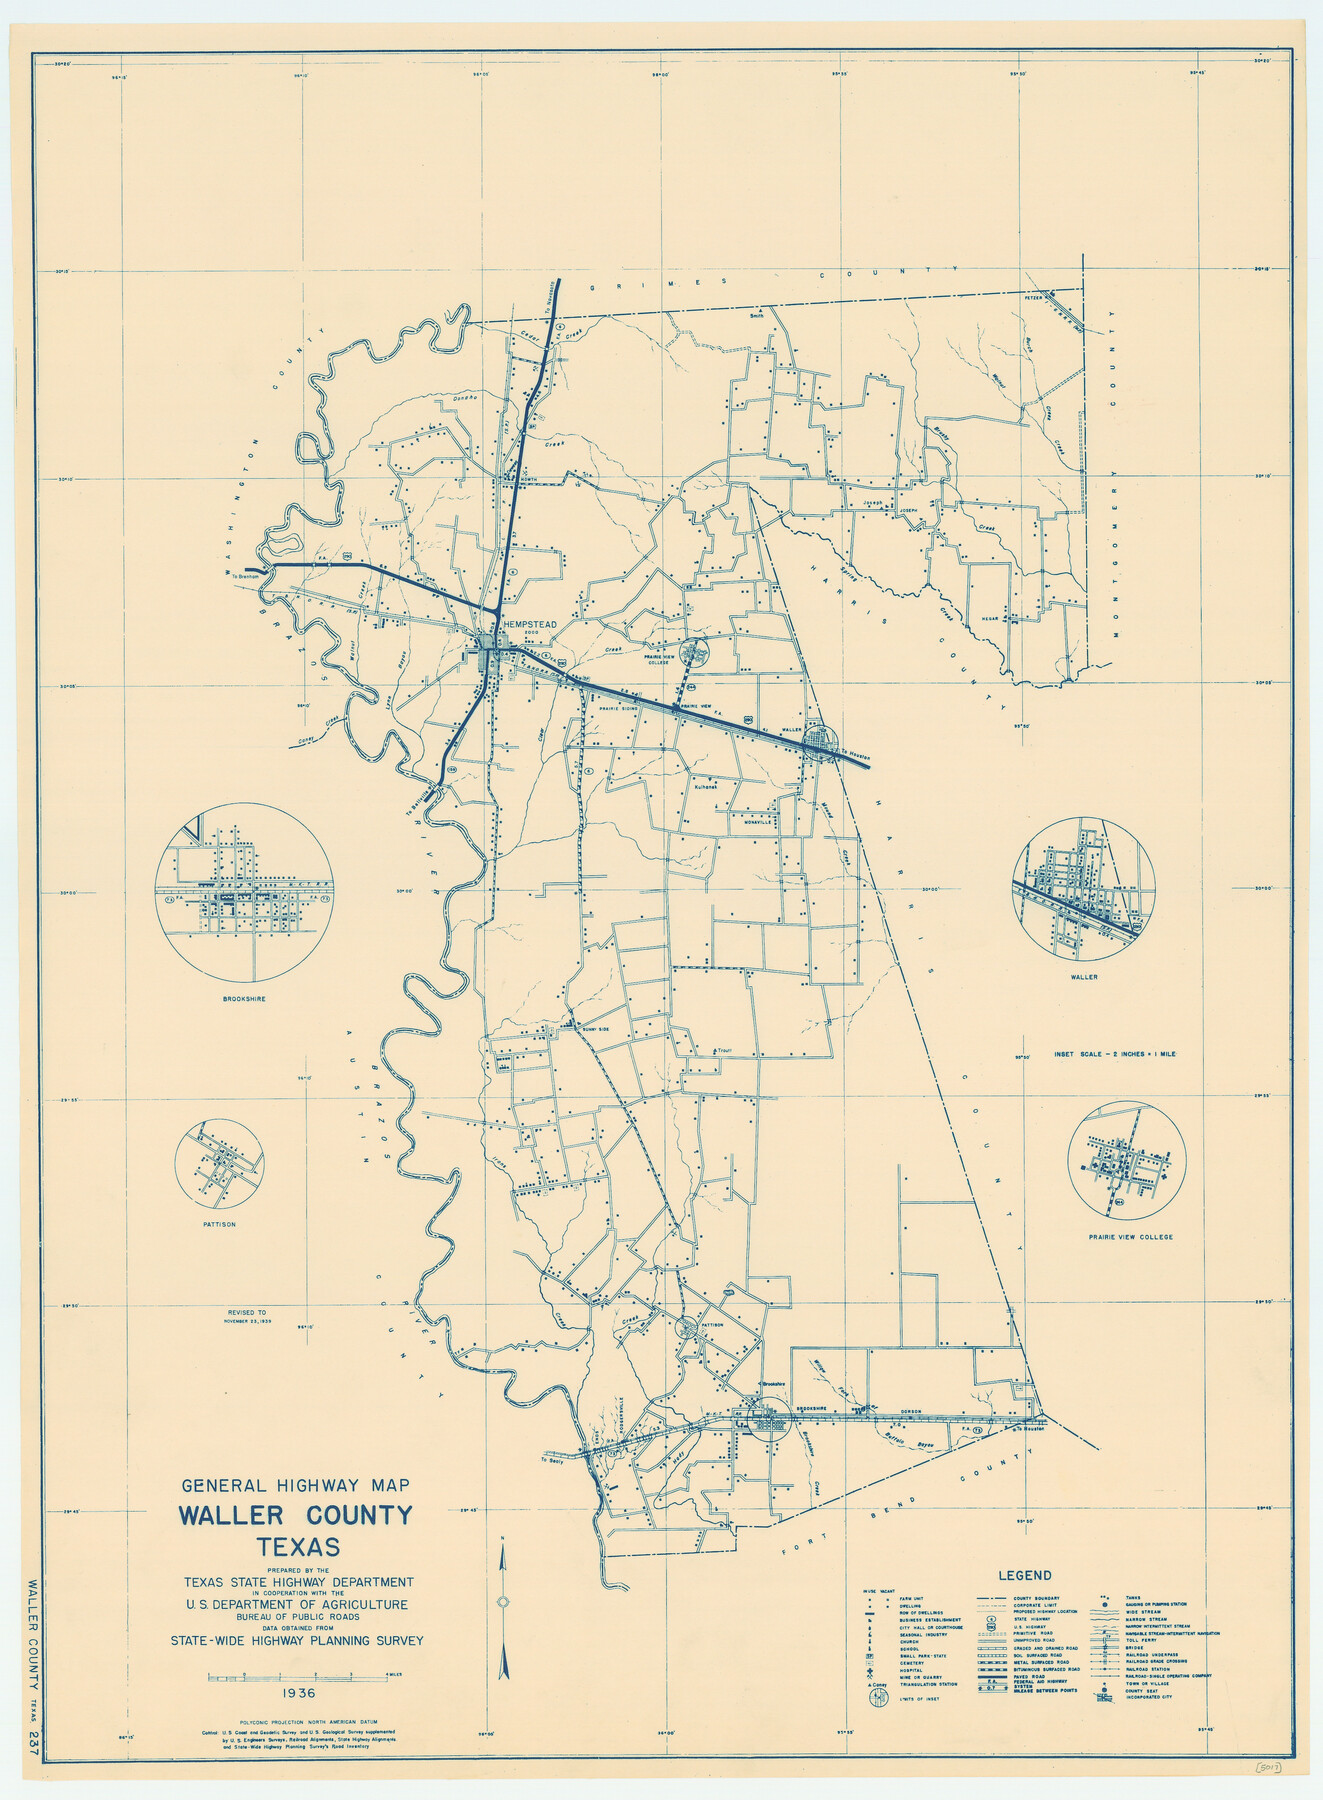 79270, General Highway Map, Waller County, Texas, Texas State Library and Archives